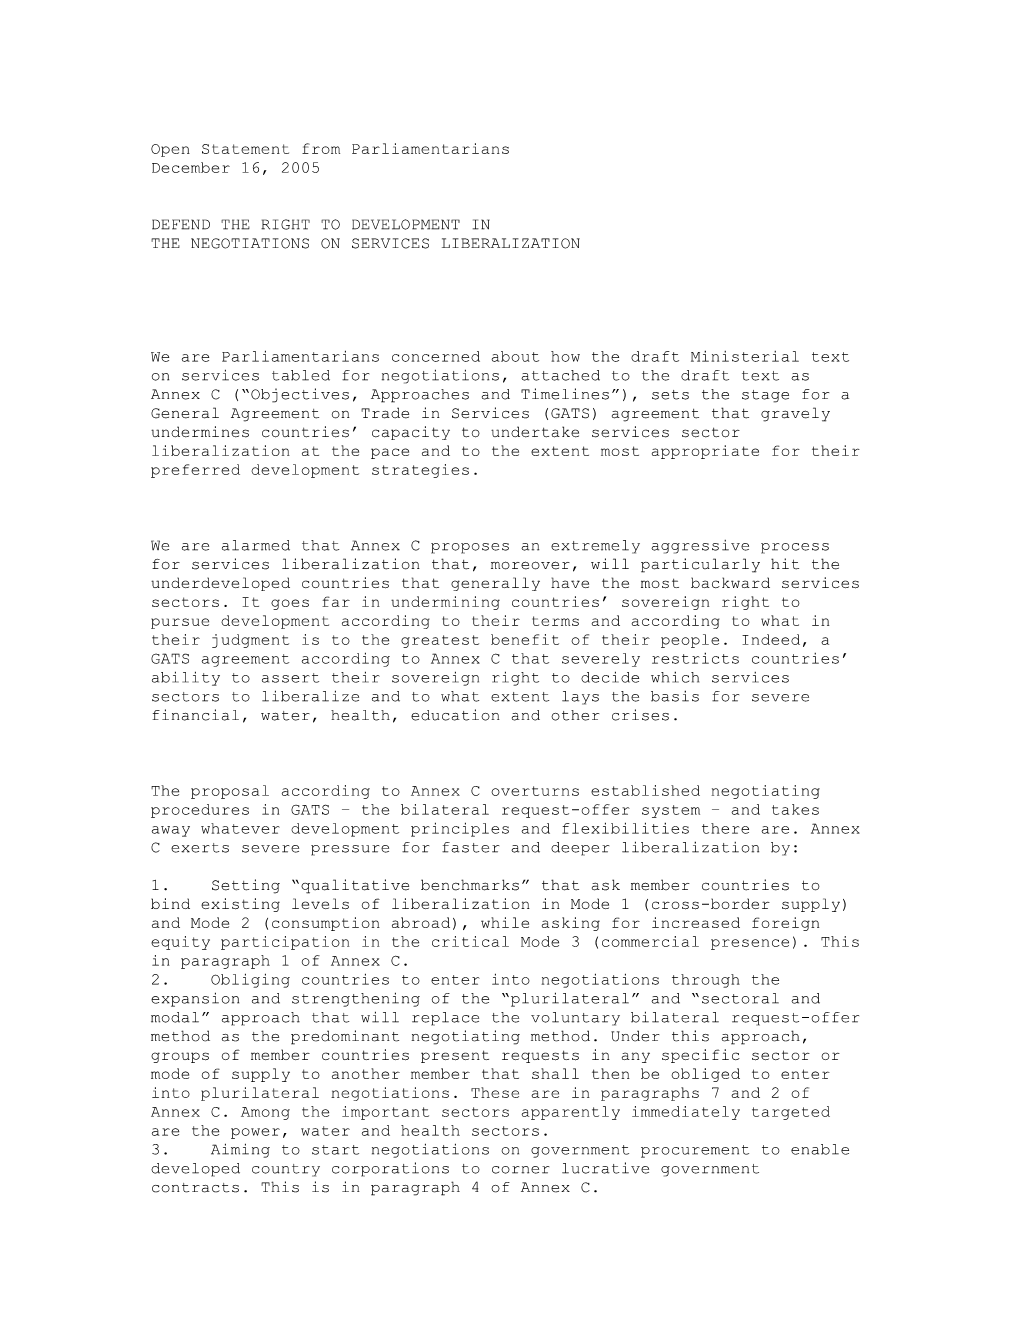 Open Statement from Parliamentarians December 16, 2005 DEFEND the RIGHT to DEVELOPMENT in the NEGOTIATIONS on SERVICES LIBERALIZ